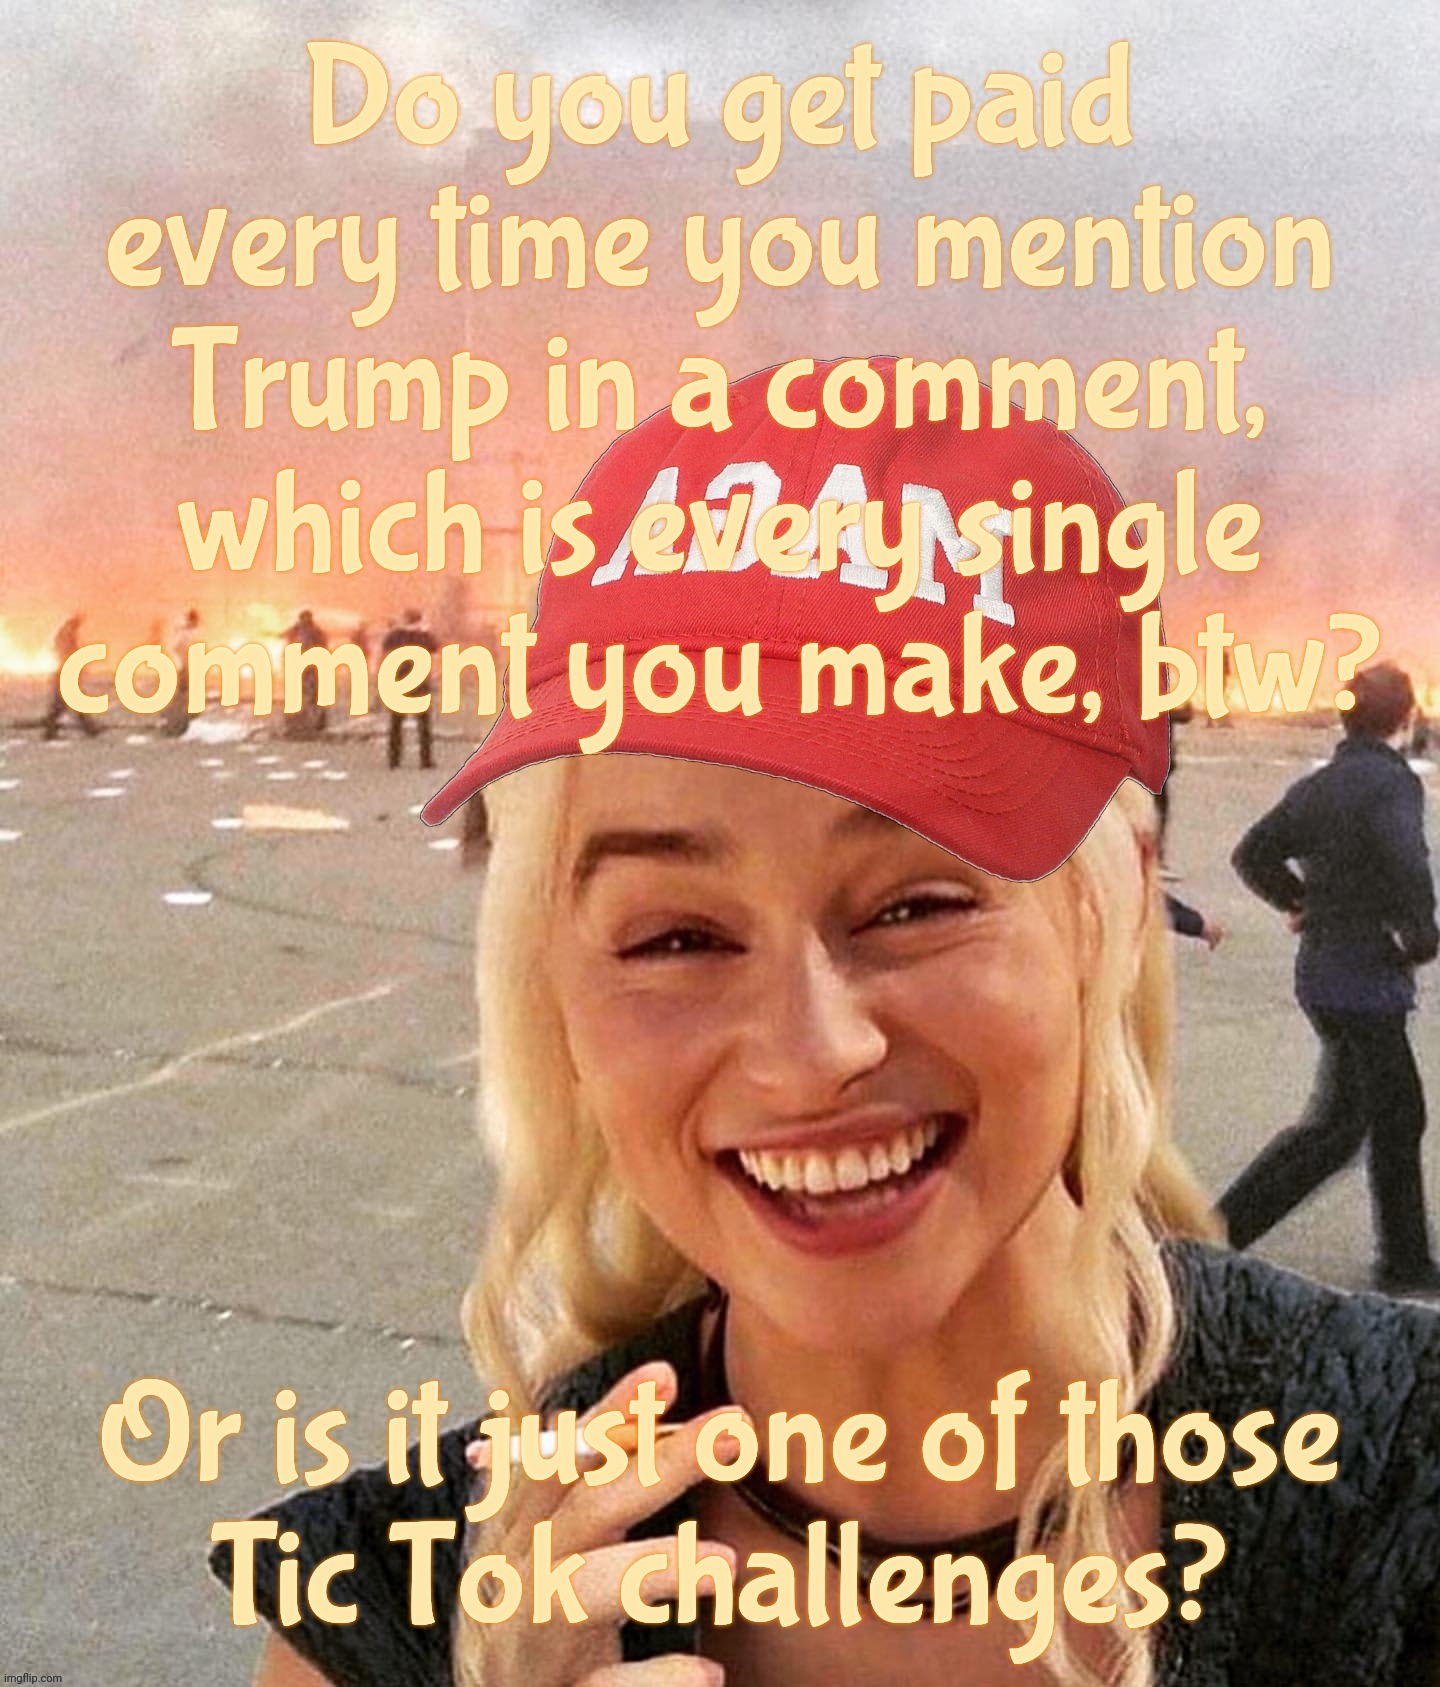 Question to the MAGAtronic shills | Do you get paid every time you mention
Trump in a comment,
which is every single
comment you make, btw? Or is it just one of those
Tic Tok challenges? | image tagged in disaster smoker girl maga edition,every comment is about trump,how much do you get paid for that,shill's gotta shill,magats | made w/ Imgflip meme maker